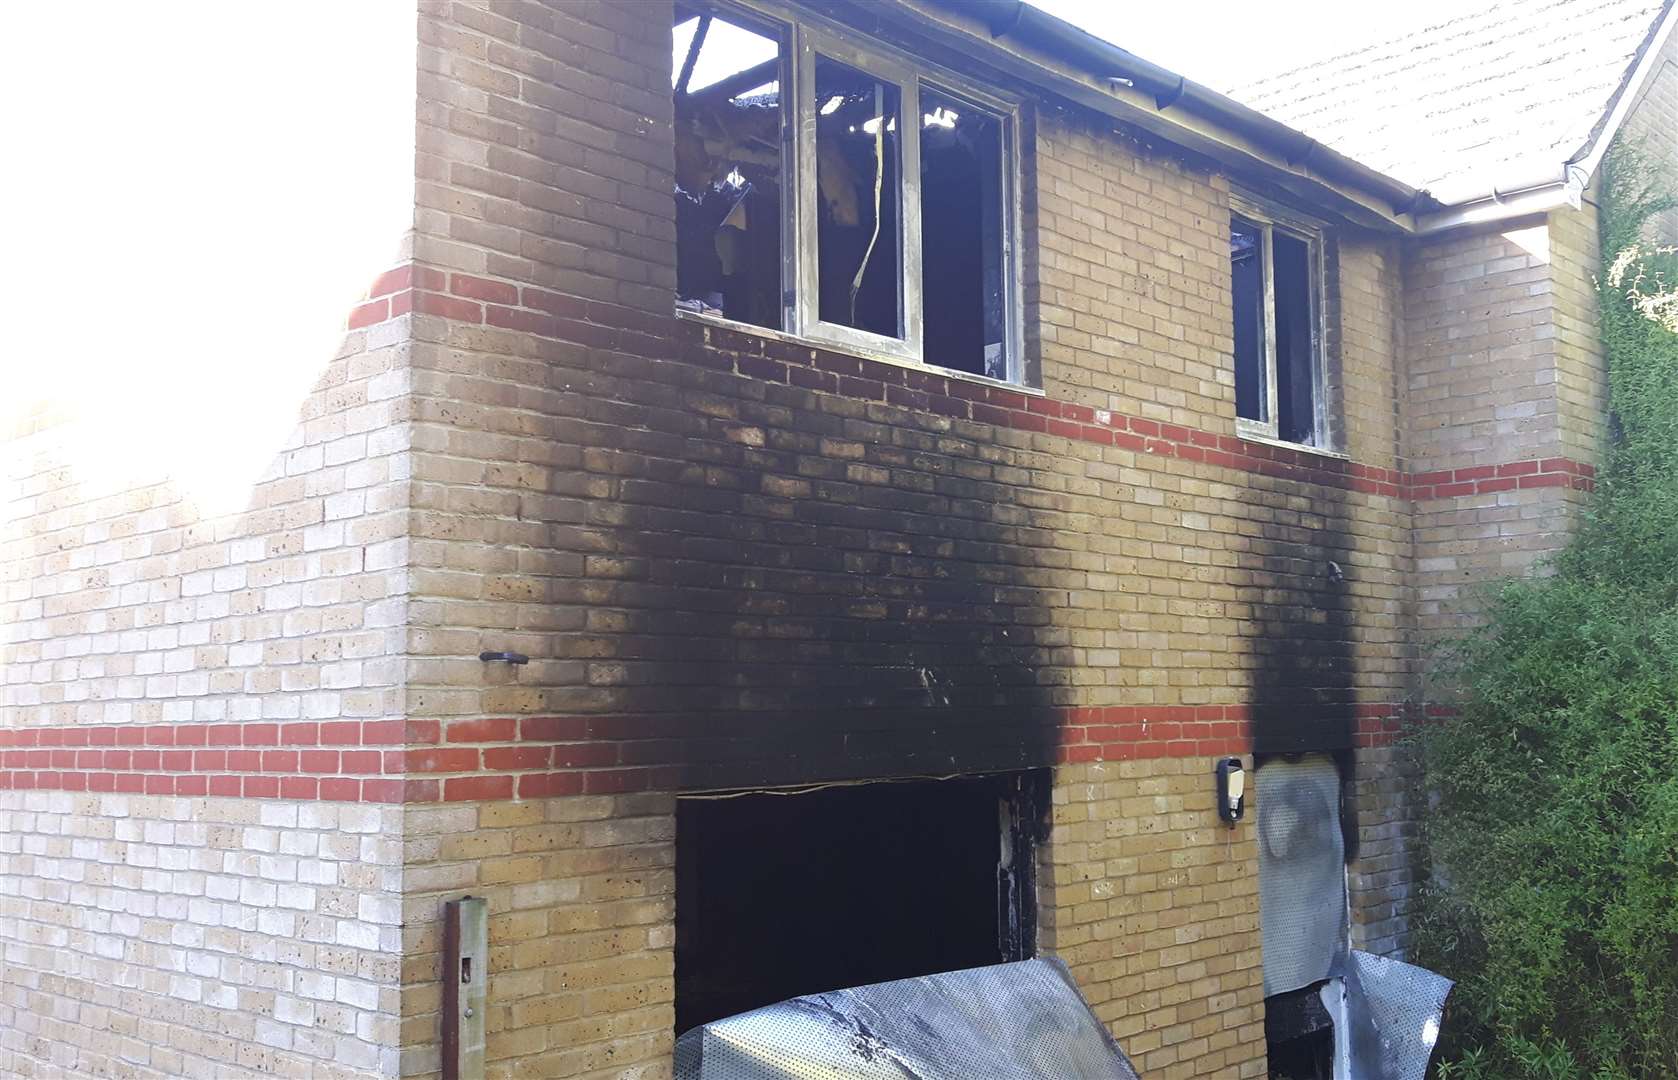 A series of arson attacks have happened at the site